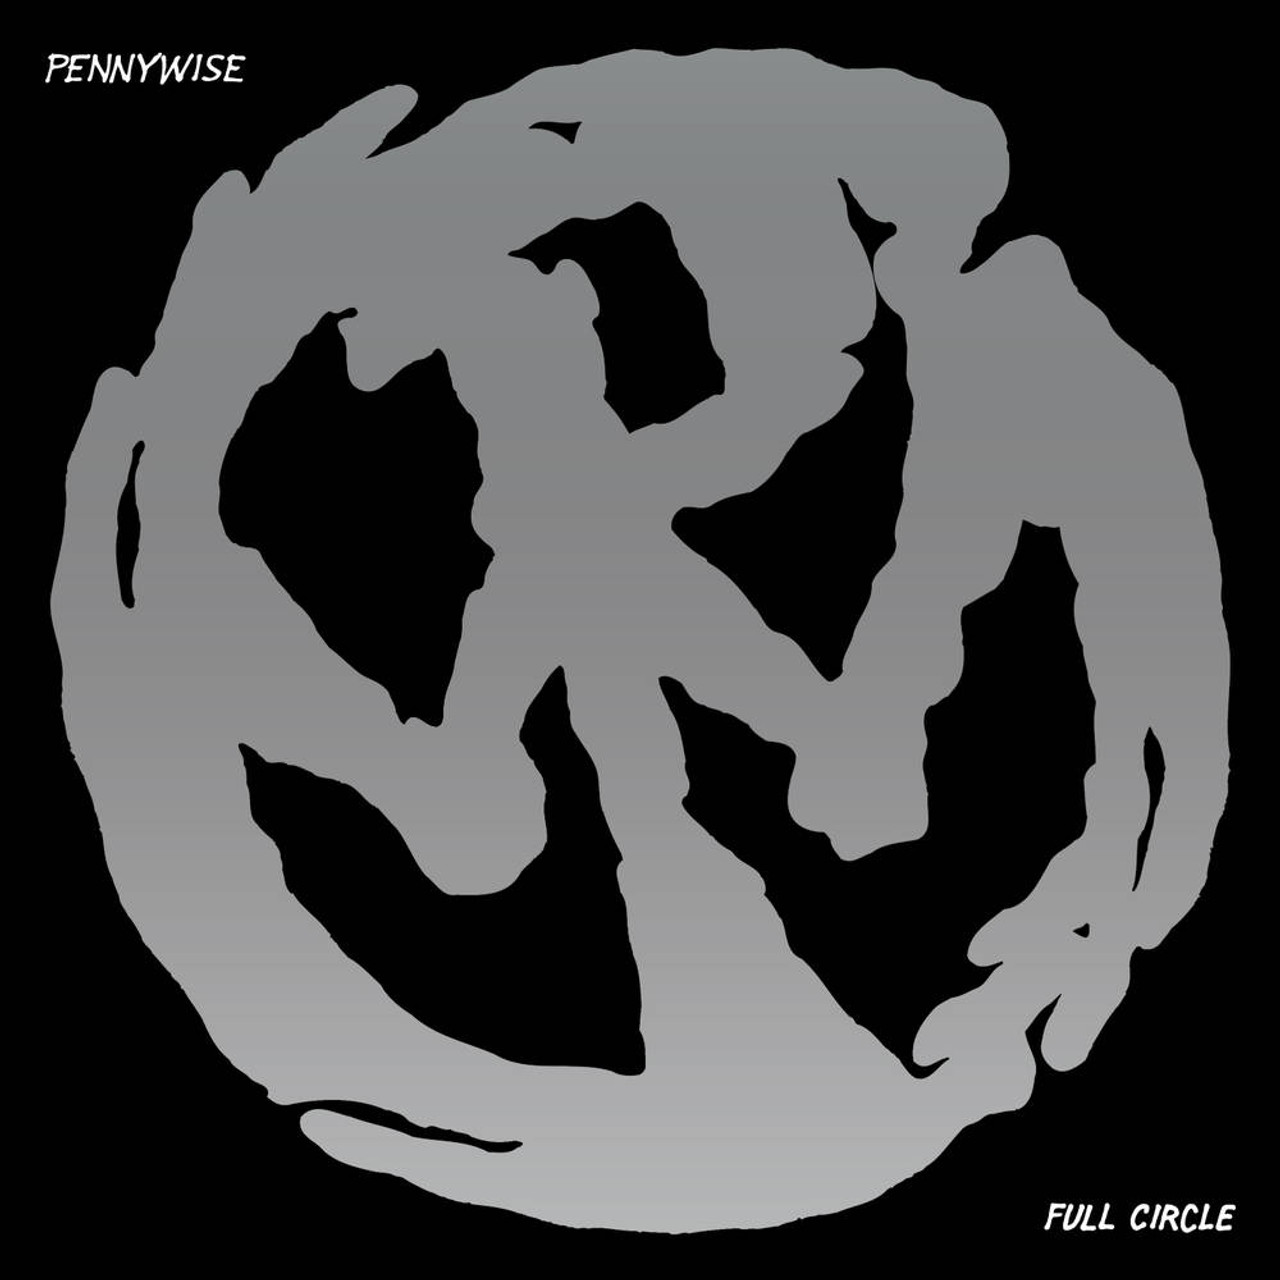 Full Circle - Pennywise (#045778648900)